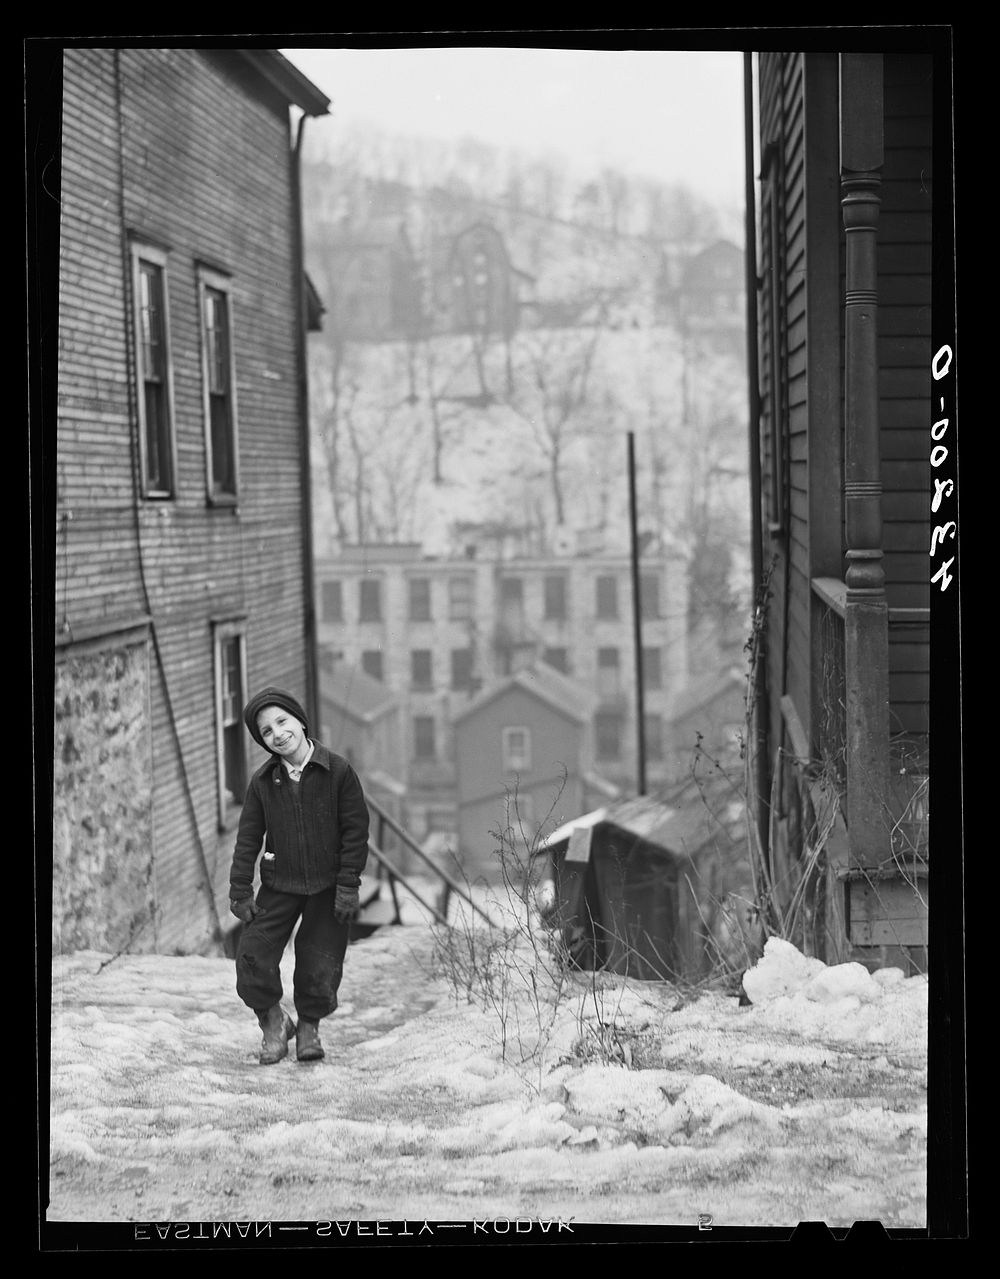 [Little boy in Freedom, Pennsylvania]. Sourced from the Library of Congress.